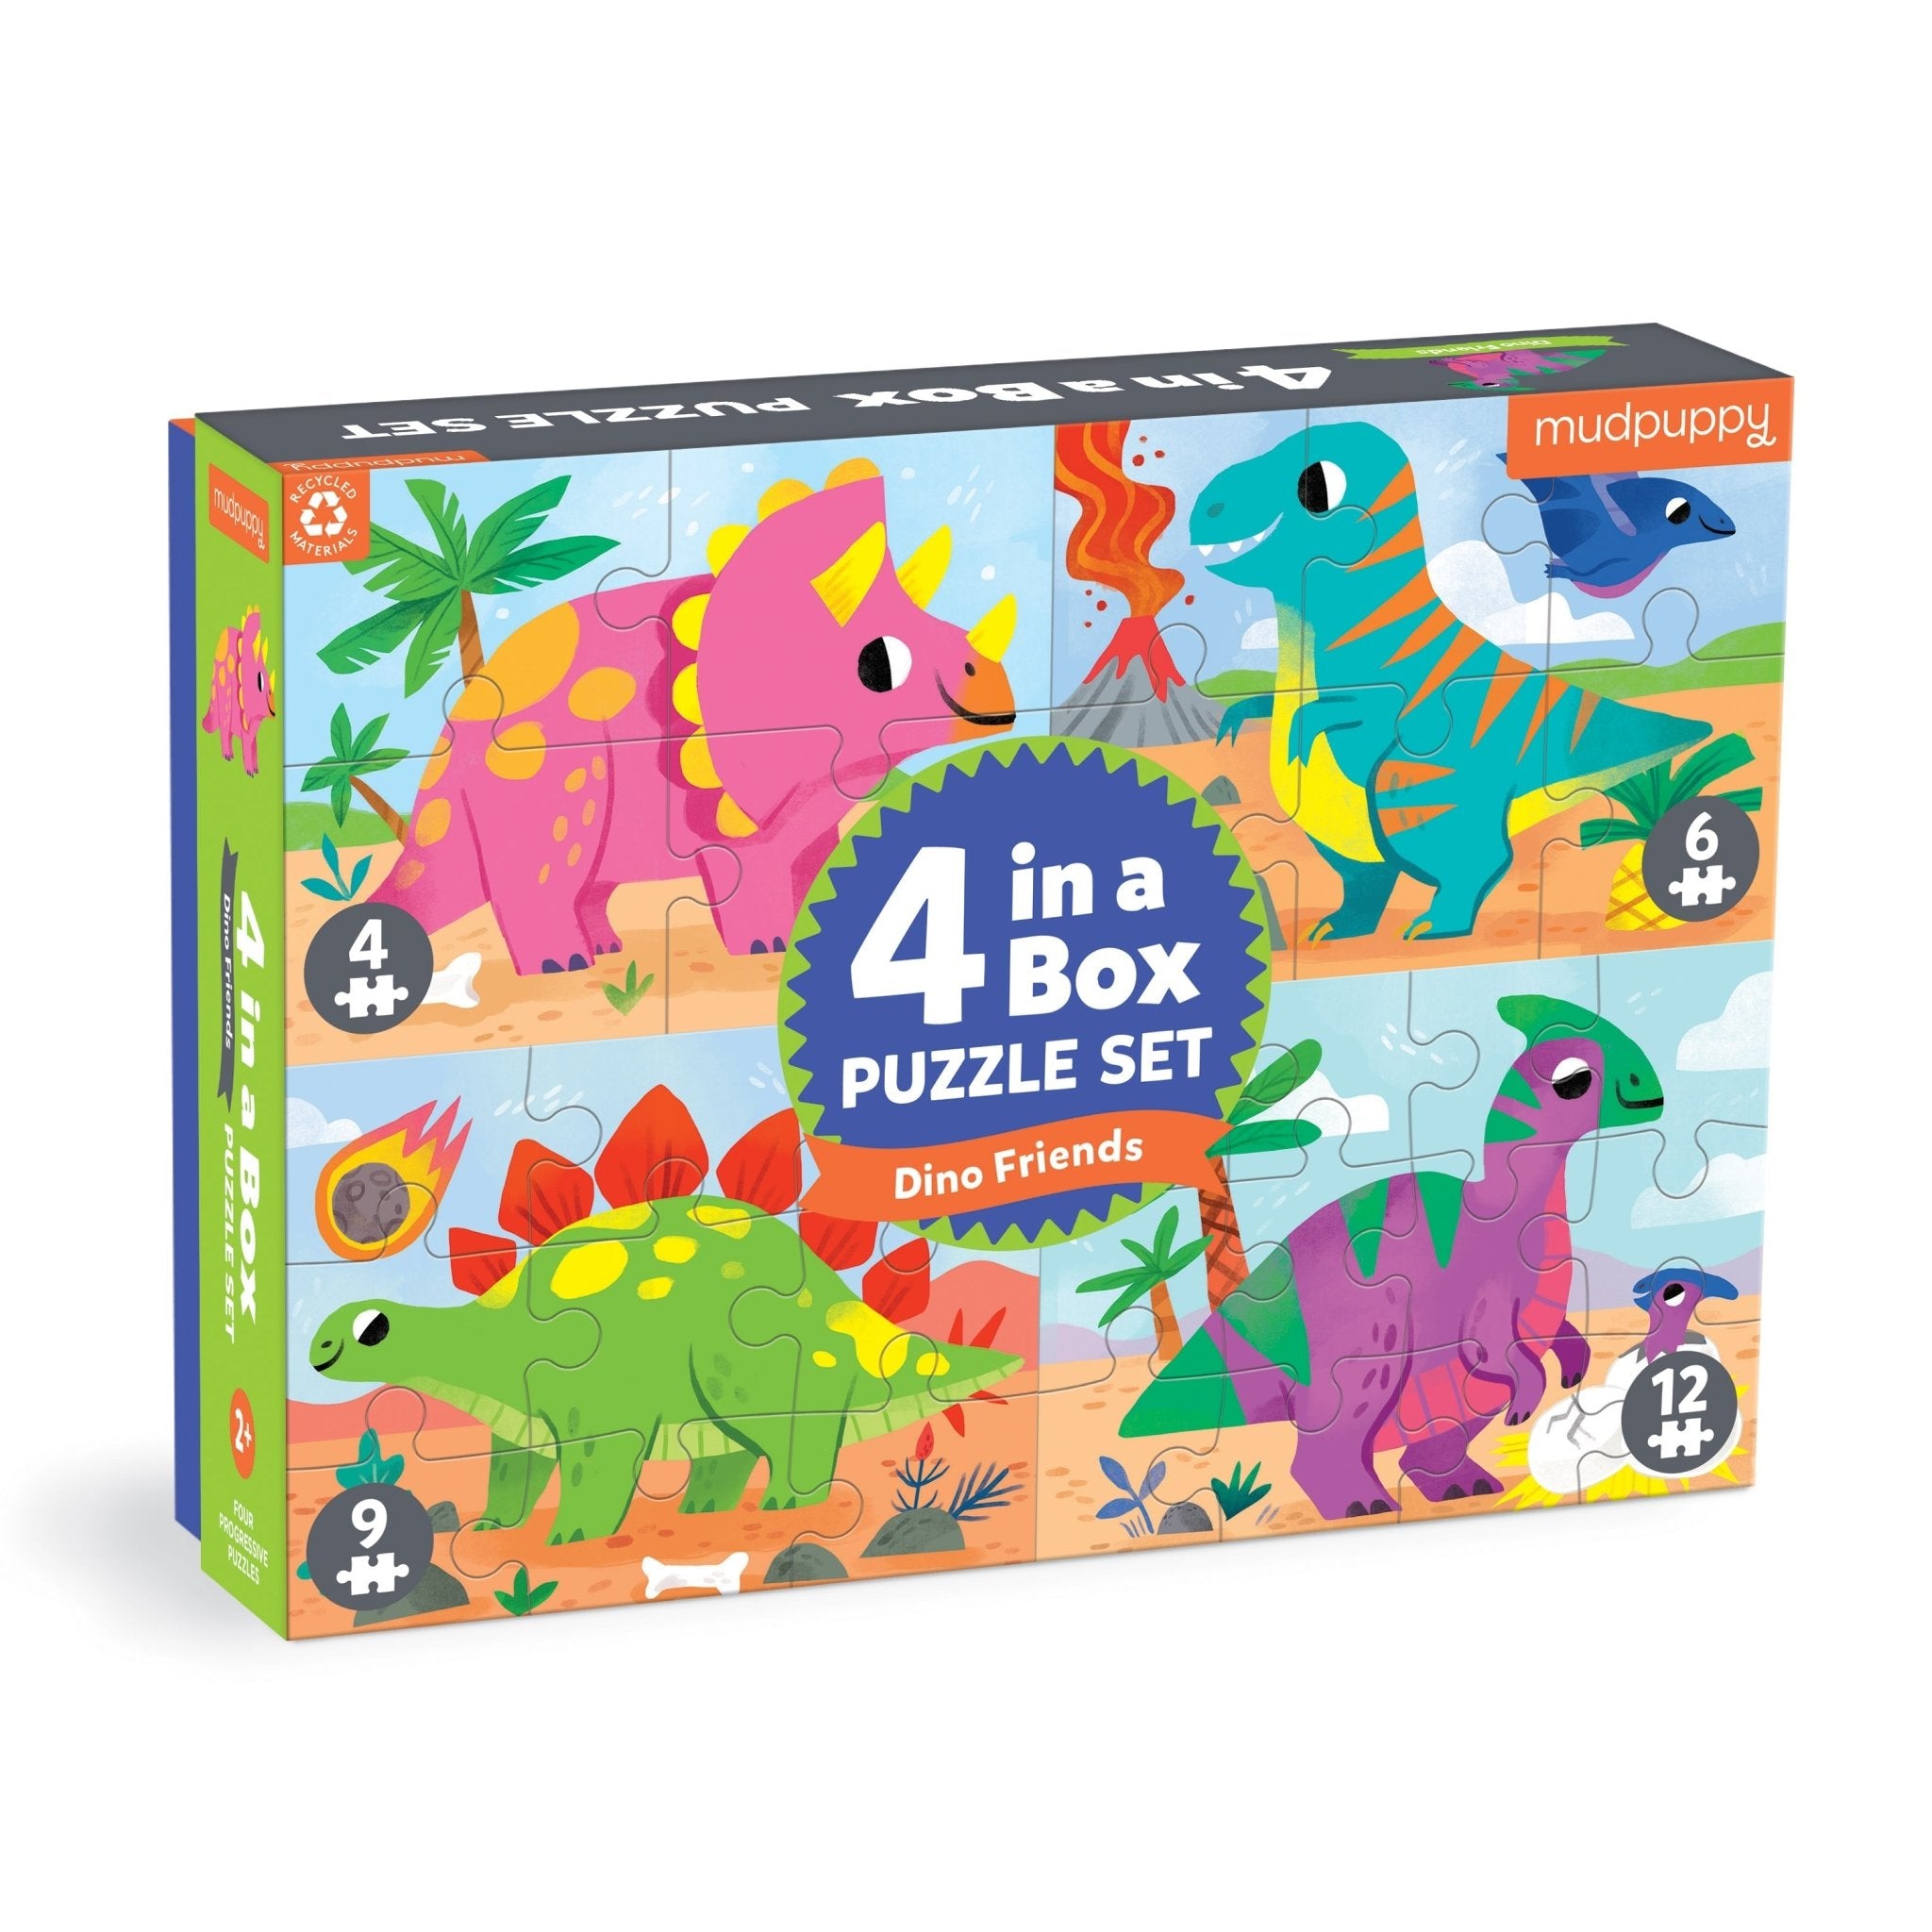 New Wooden Jigsaw Puzzle - Board Game for Kids ( Pack of 1 ) US